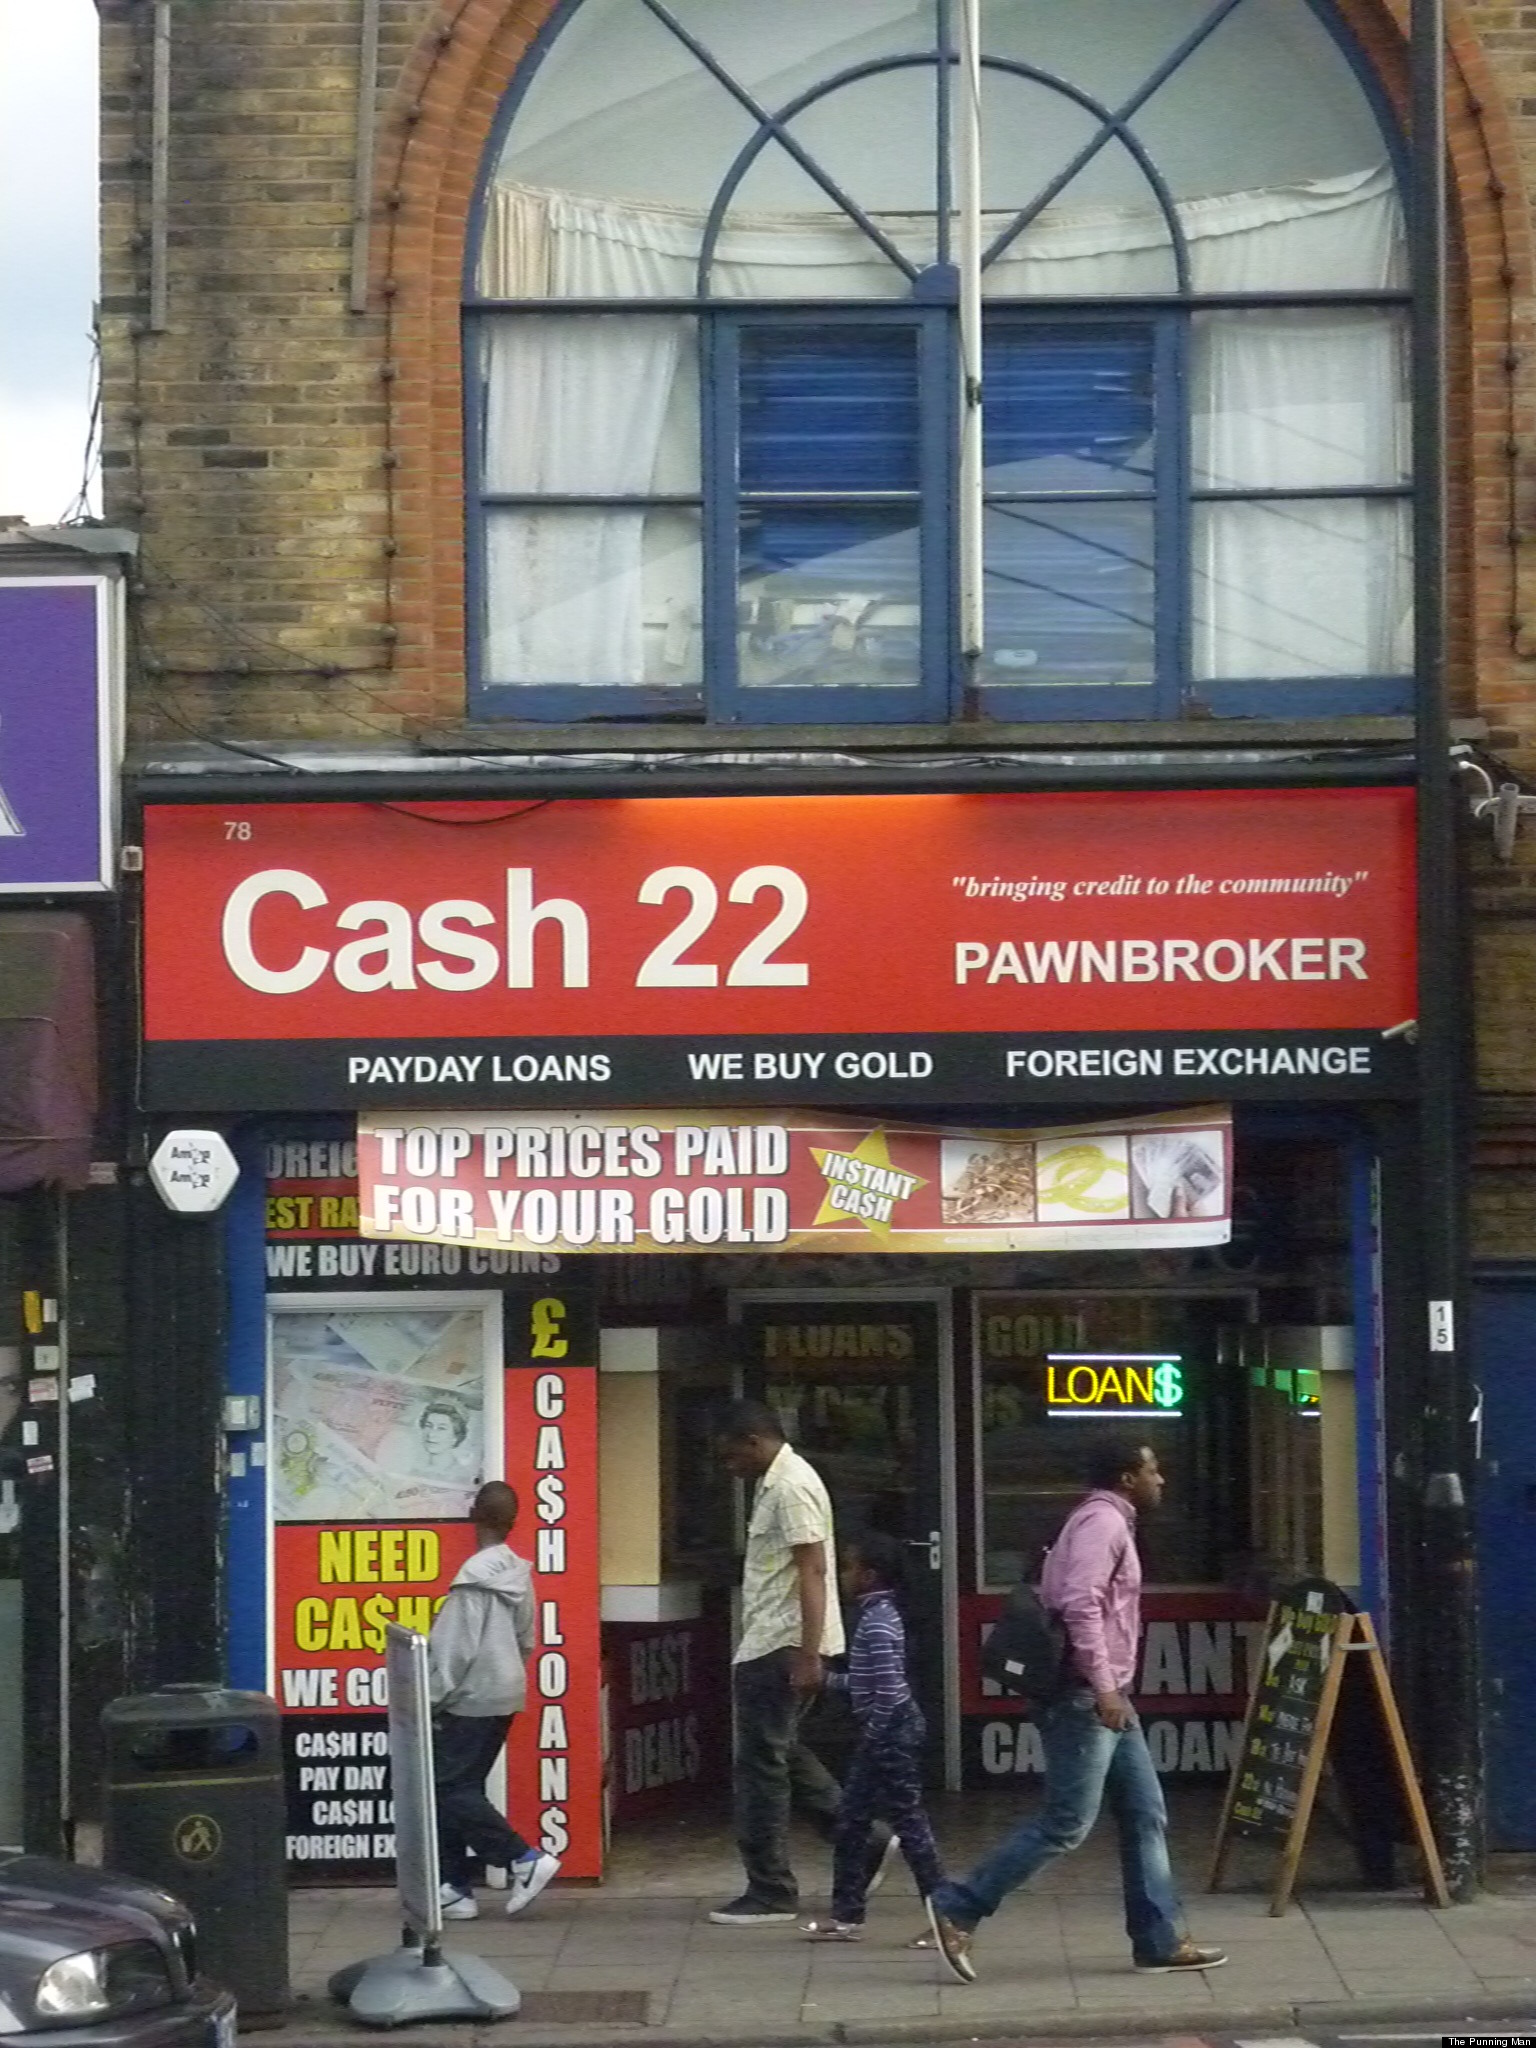 20 More Funny Punning Business Names (PICTURES) | HuffPost UK